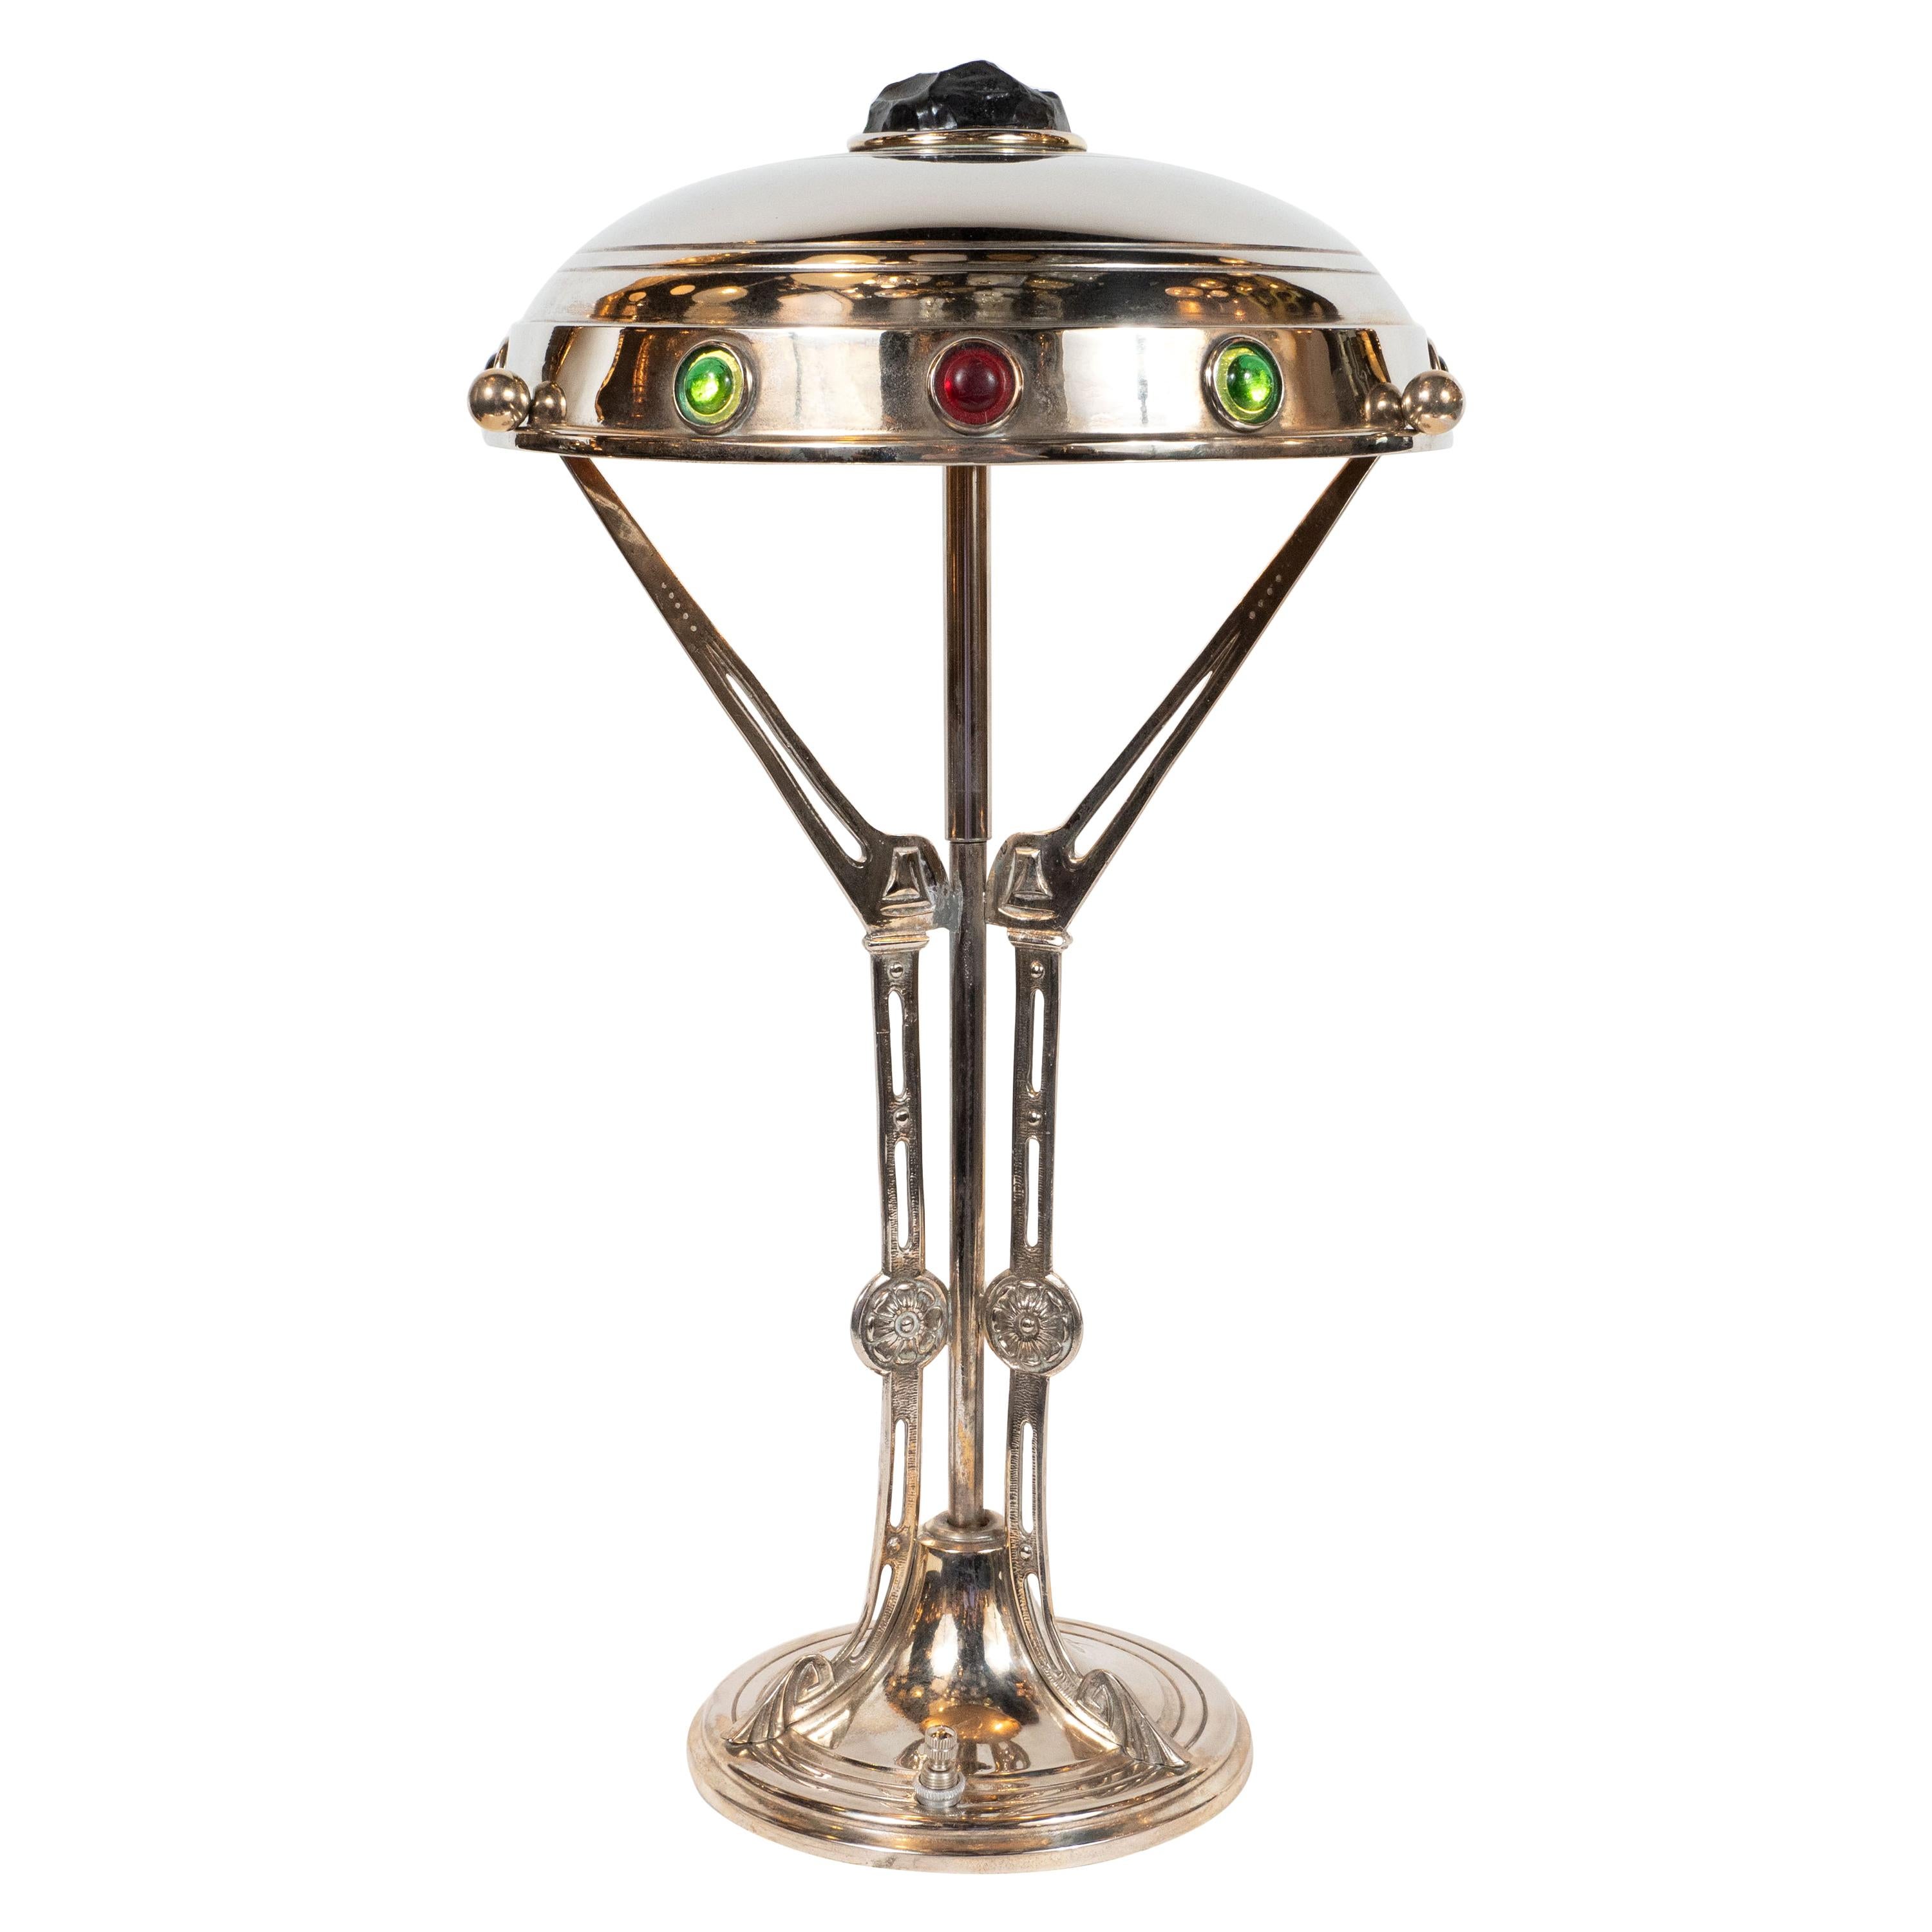 Art Deco Nickel Table Lamp with Sculptural Supports w/ Jewel Tone Glass Accents